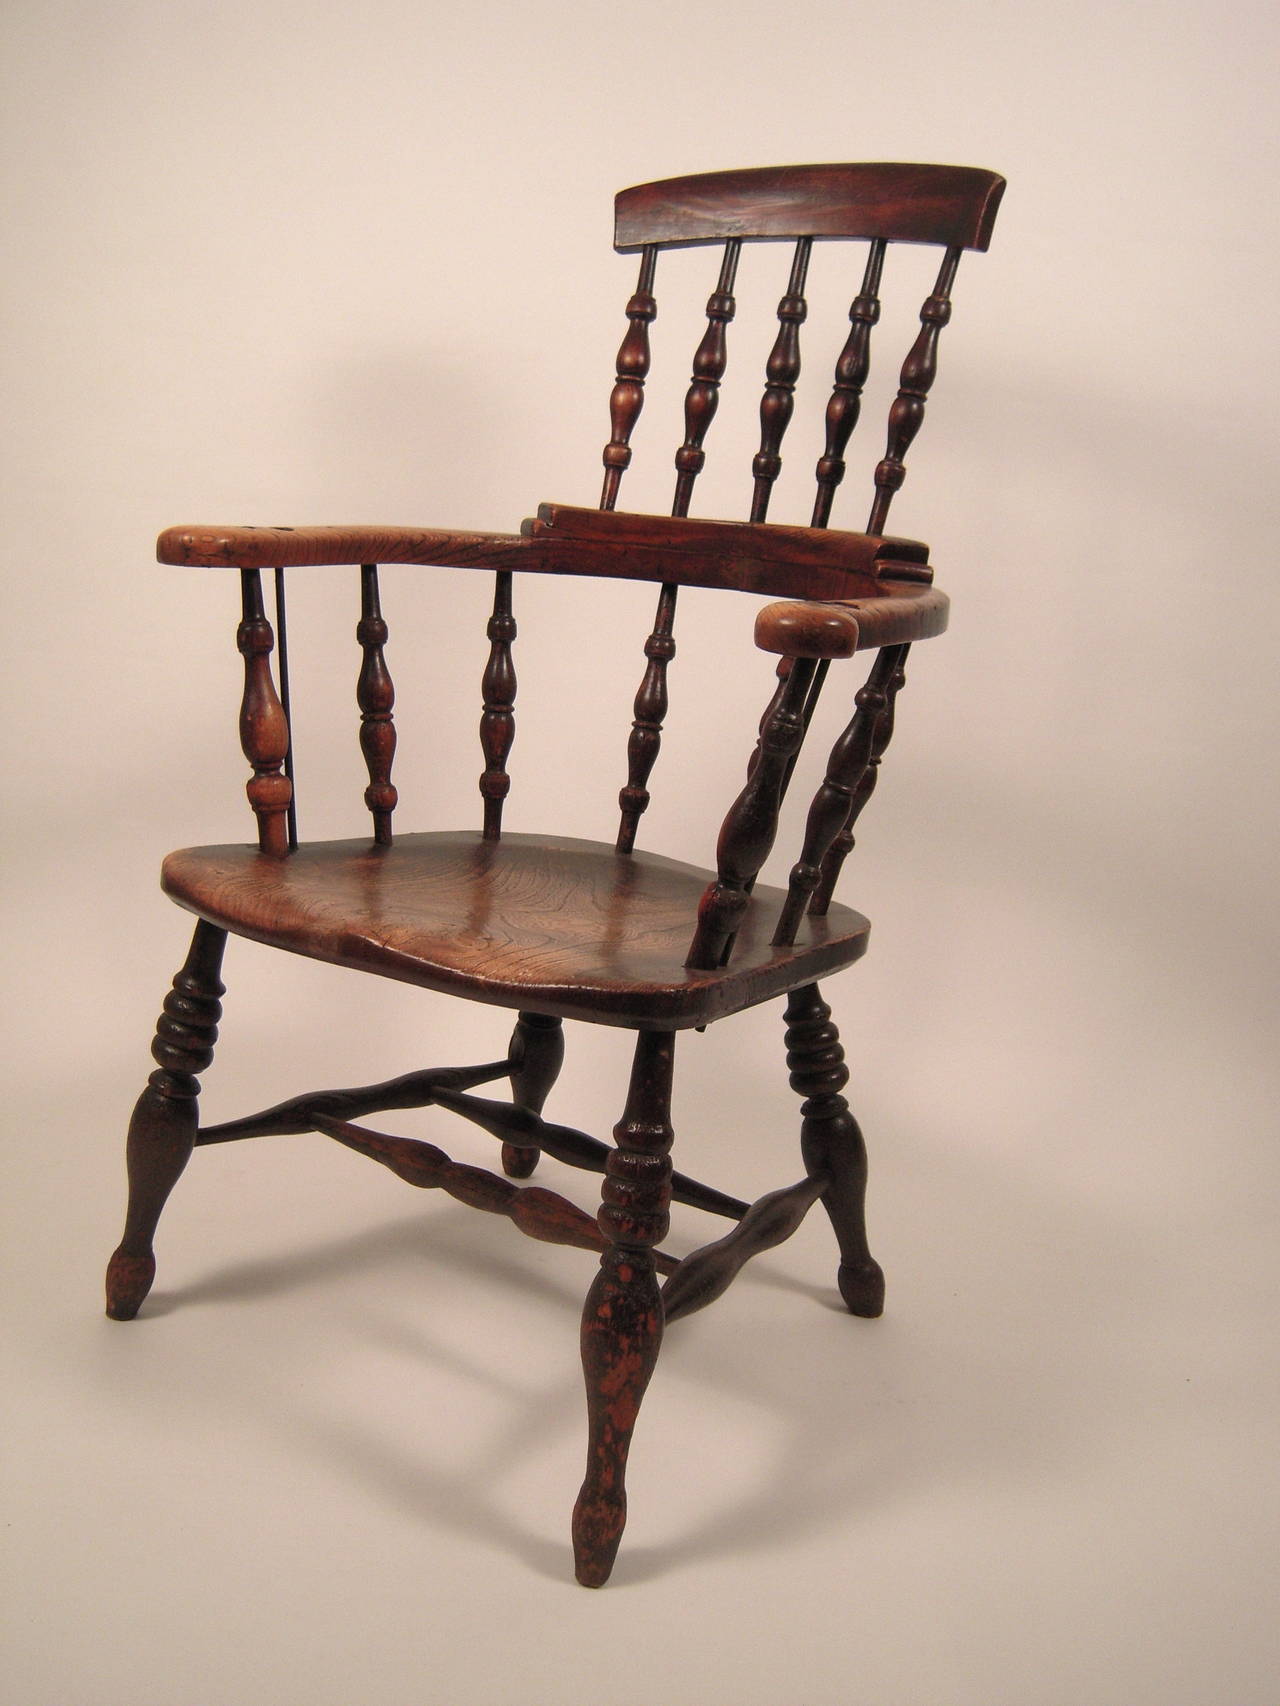 An English Country tavern chair in elm, circa 1830-1840, with wonderful color and patina, with spindle back, curved arms, a shaped, solid elm plank seat supported by boldly turned legs joined by cross stretchers.
Old, but later, metal bolt and rods